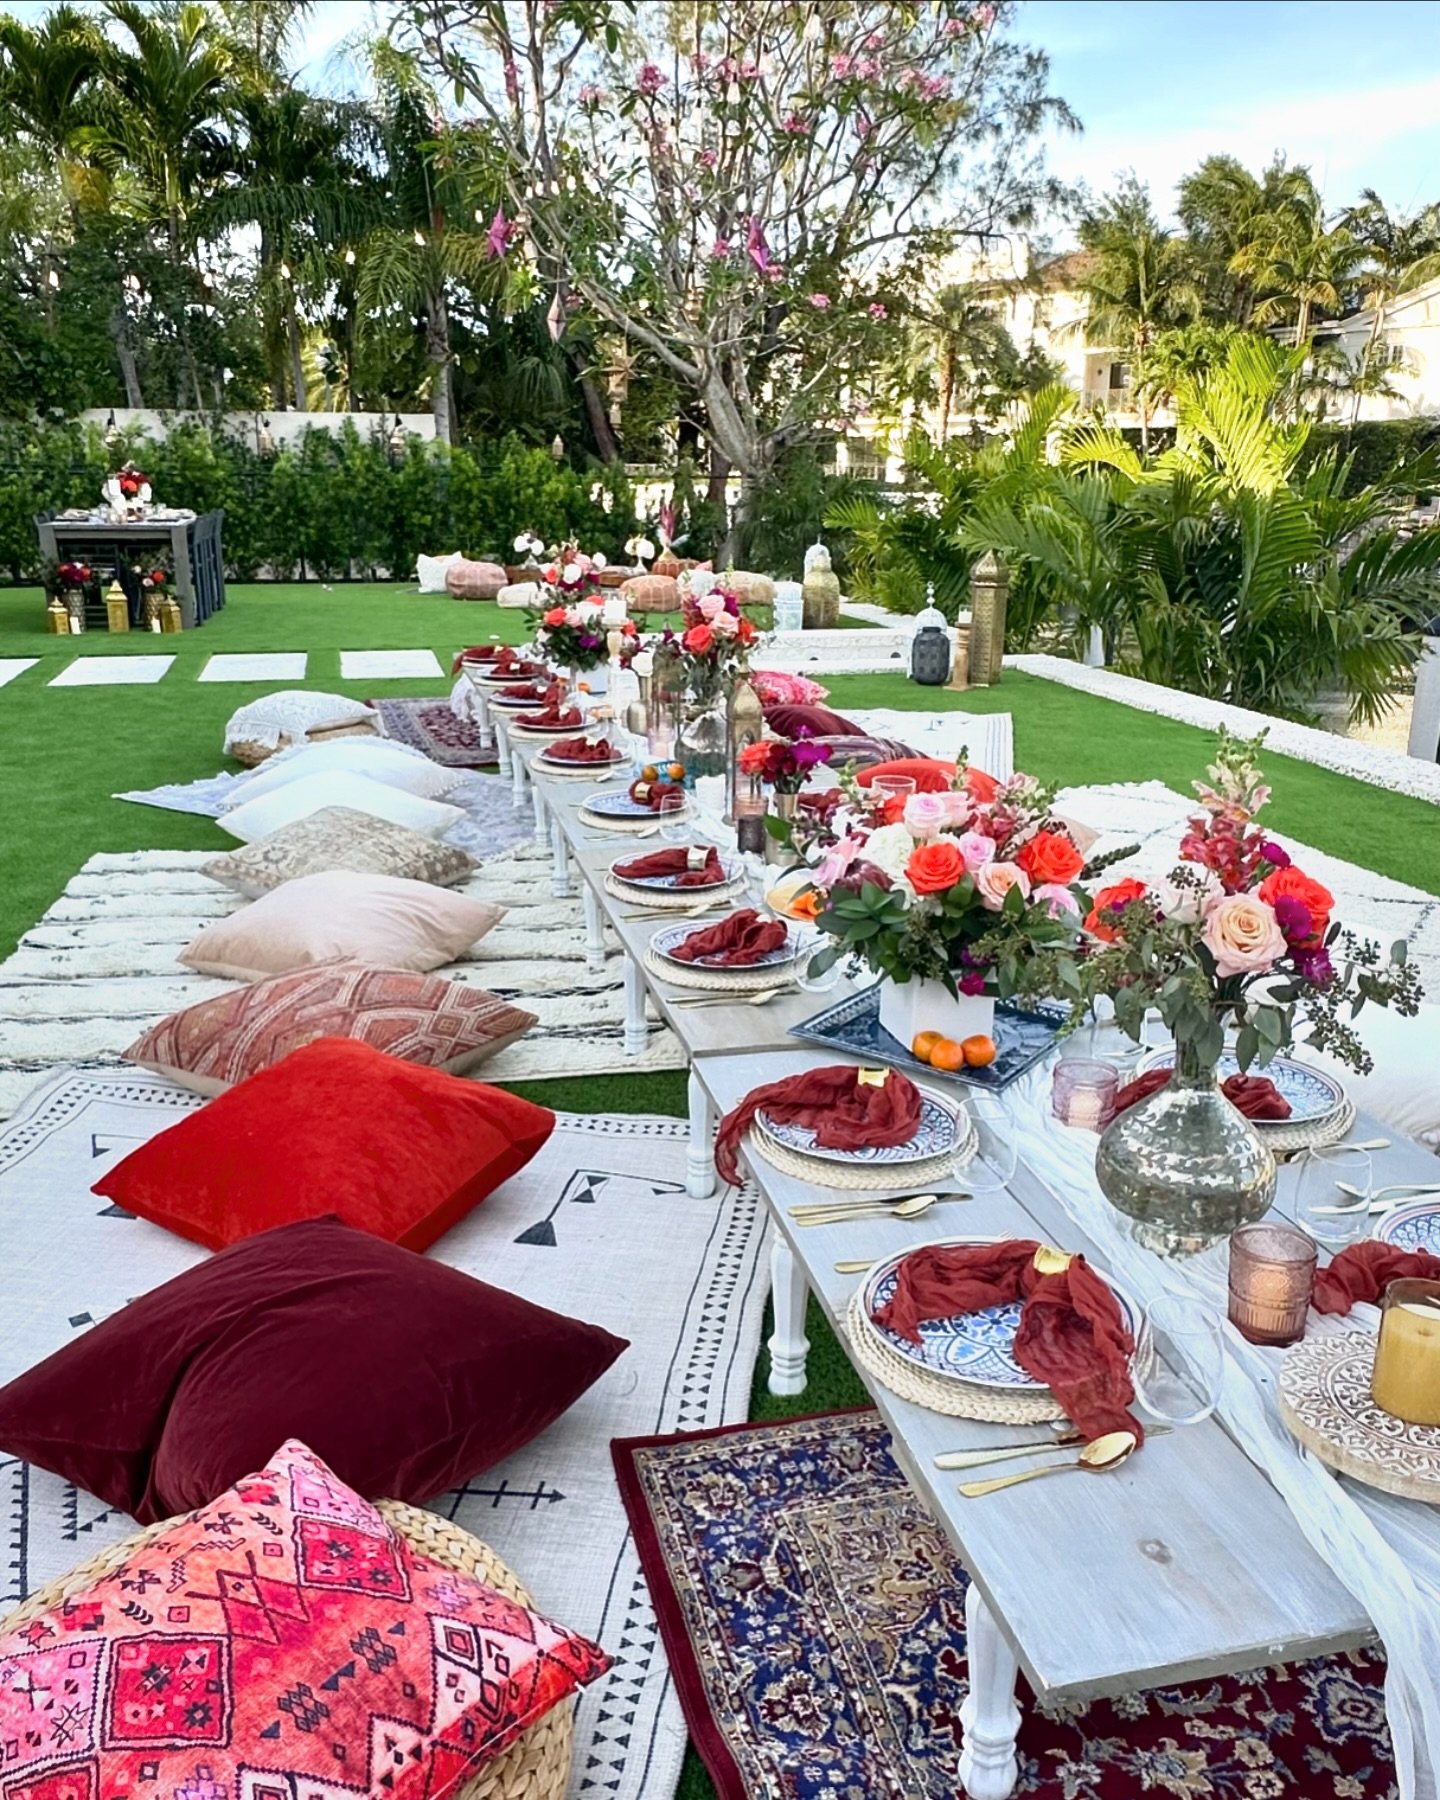 This Cappadocia-inspired Wanderlust picnic has to be one of our favorites ever! Staged in this beautiful garden on a perfect April day, the result was truly dreamy! With dream clients to match!:) How do you think it turned out?

#luxuryhomepicnic #ga